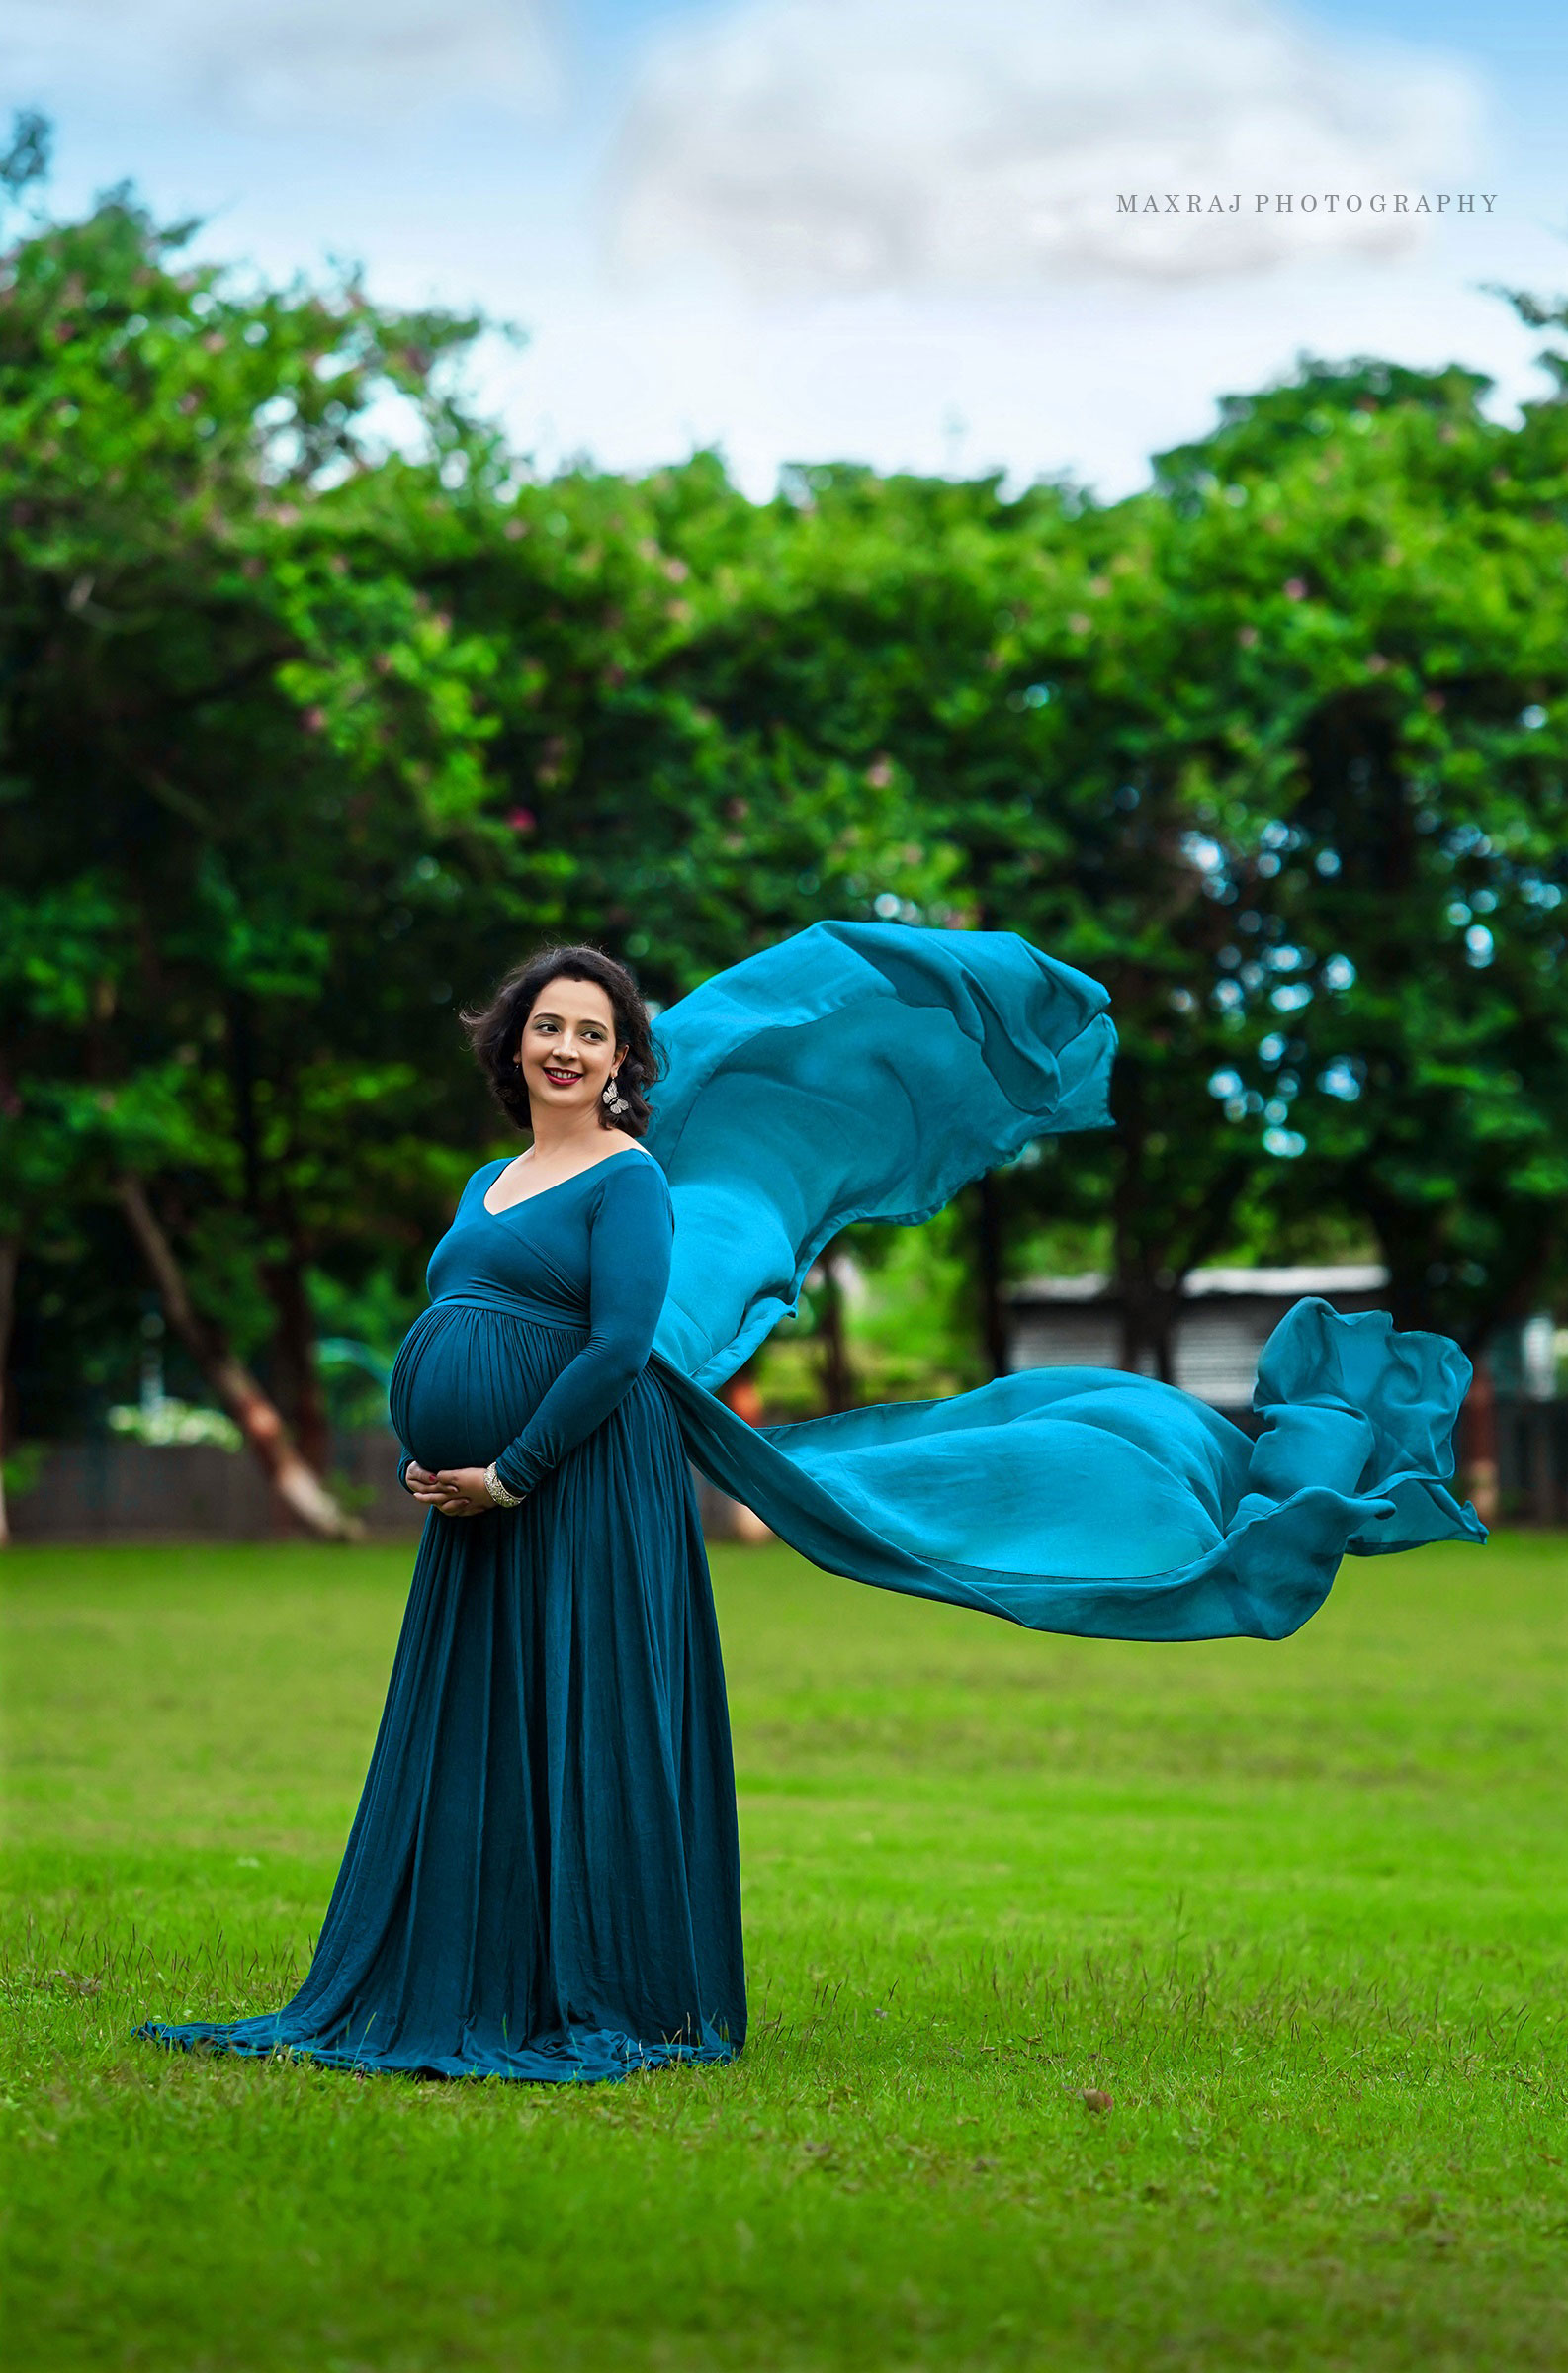 maternity photographer in pune, maternity photoshoot poses, maternity photoshoot ideas, maternity photoshoot in blue gown